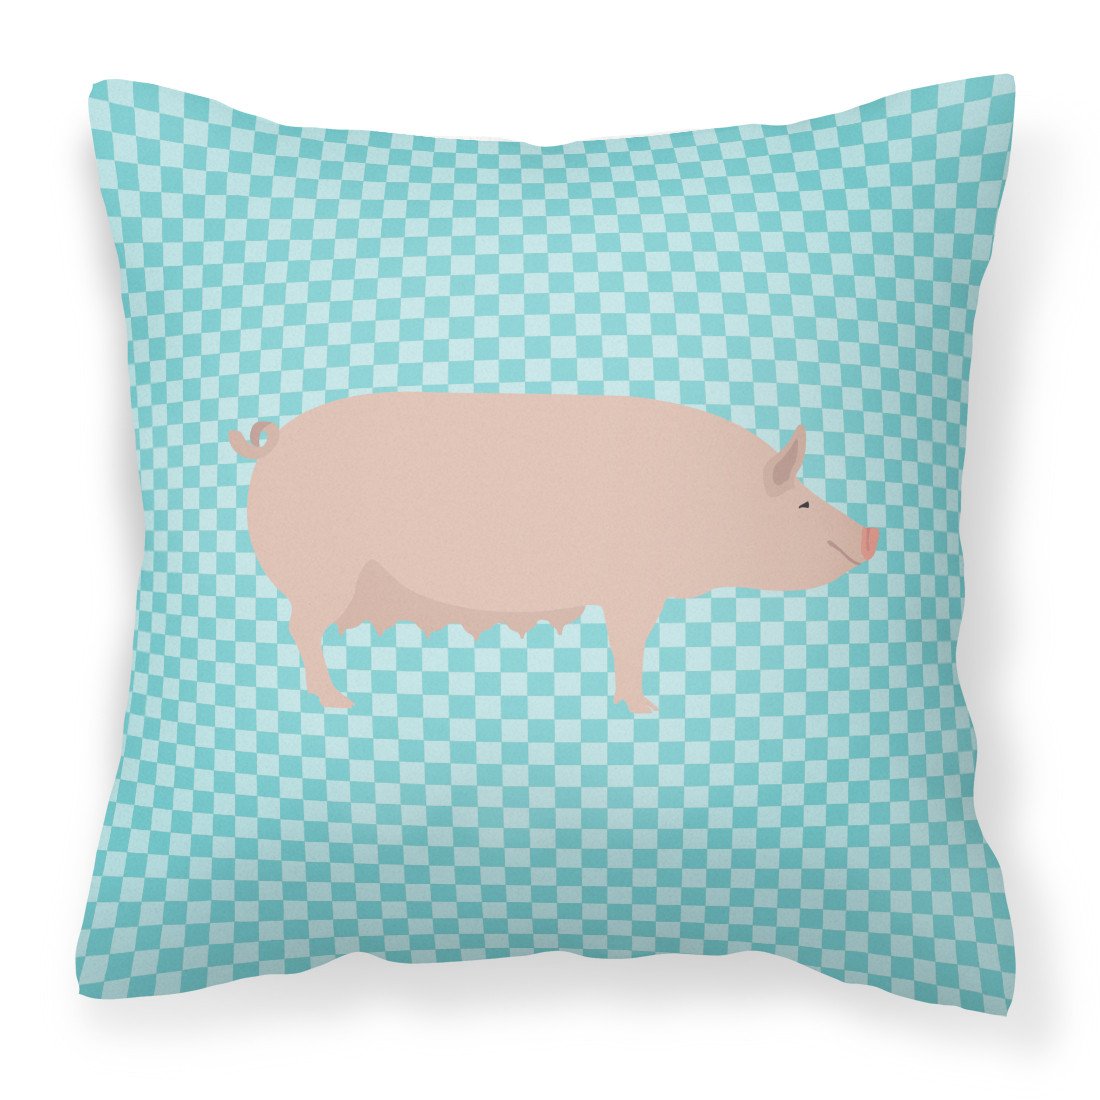 English Large White Pig Blue Check Fabric Decorative Pillow BB8112PW1818 by Caroline's Treasures